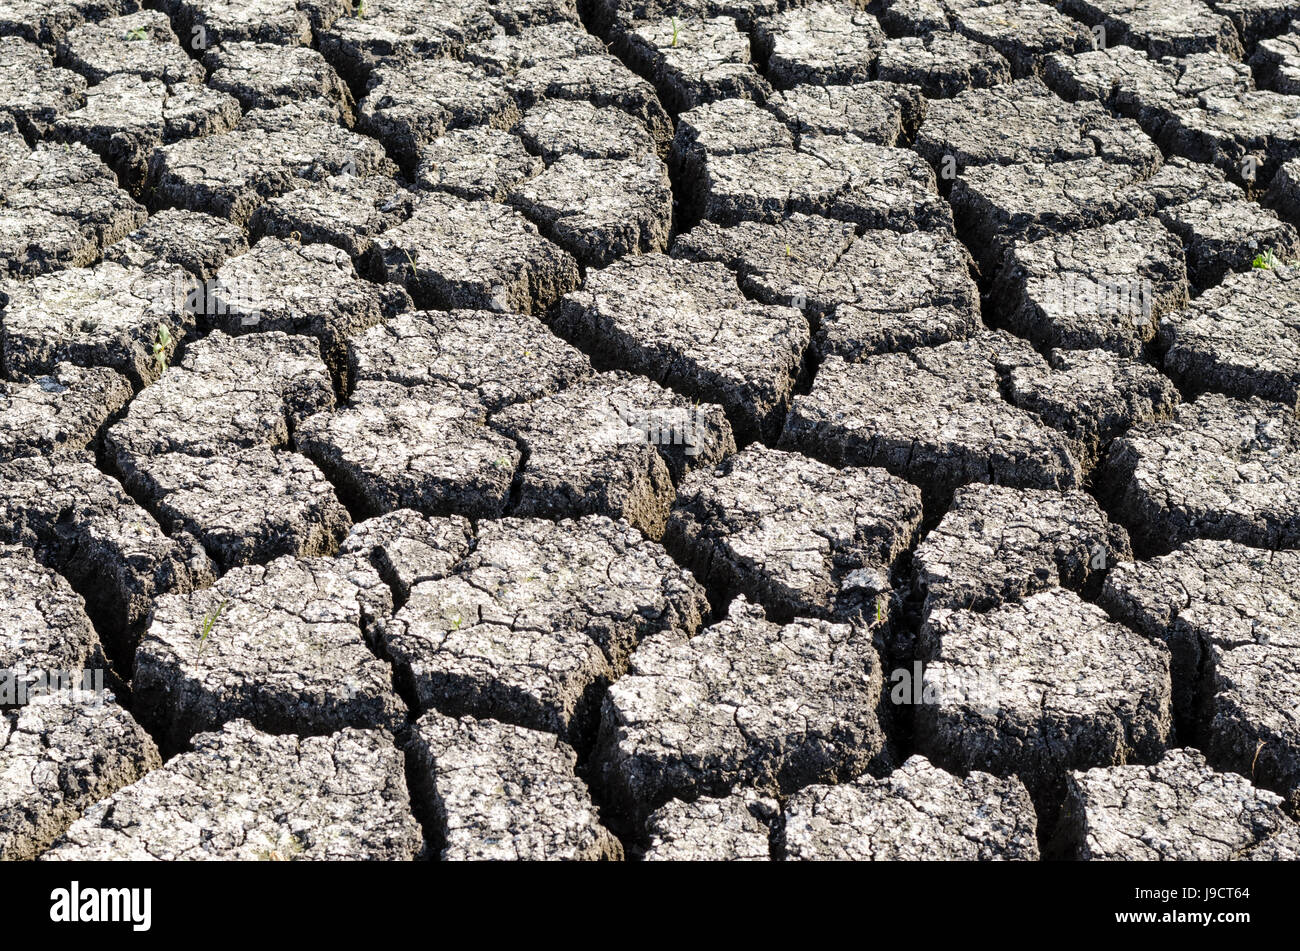 Textured background of dry cracked earth surface Stock Photo